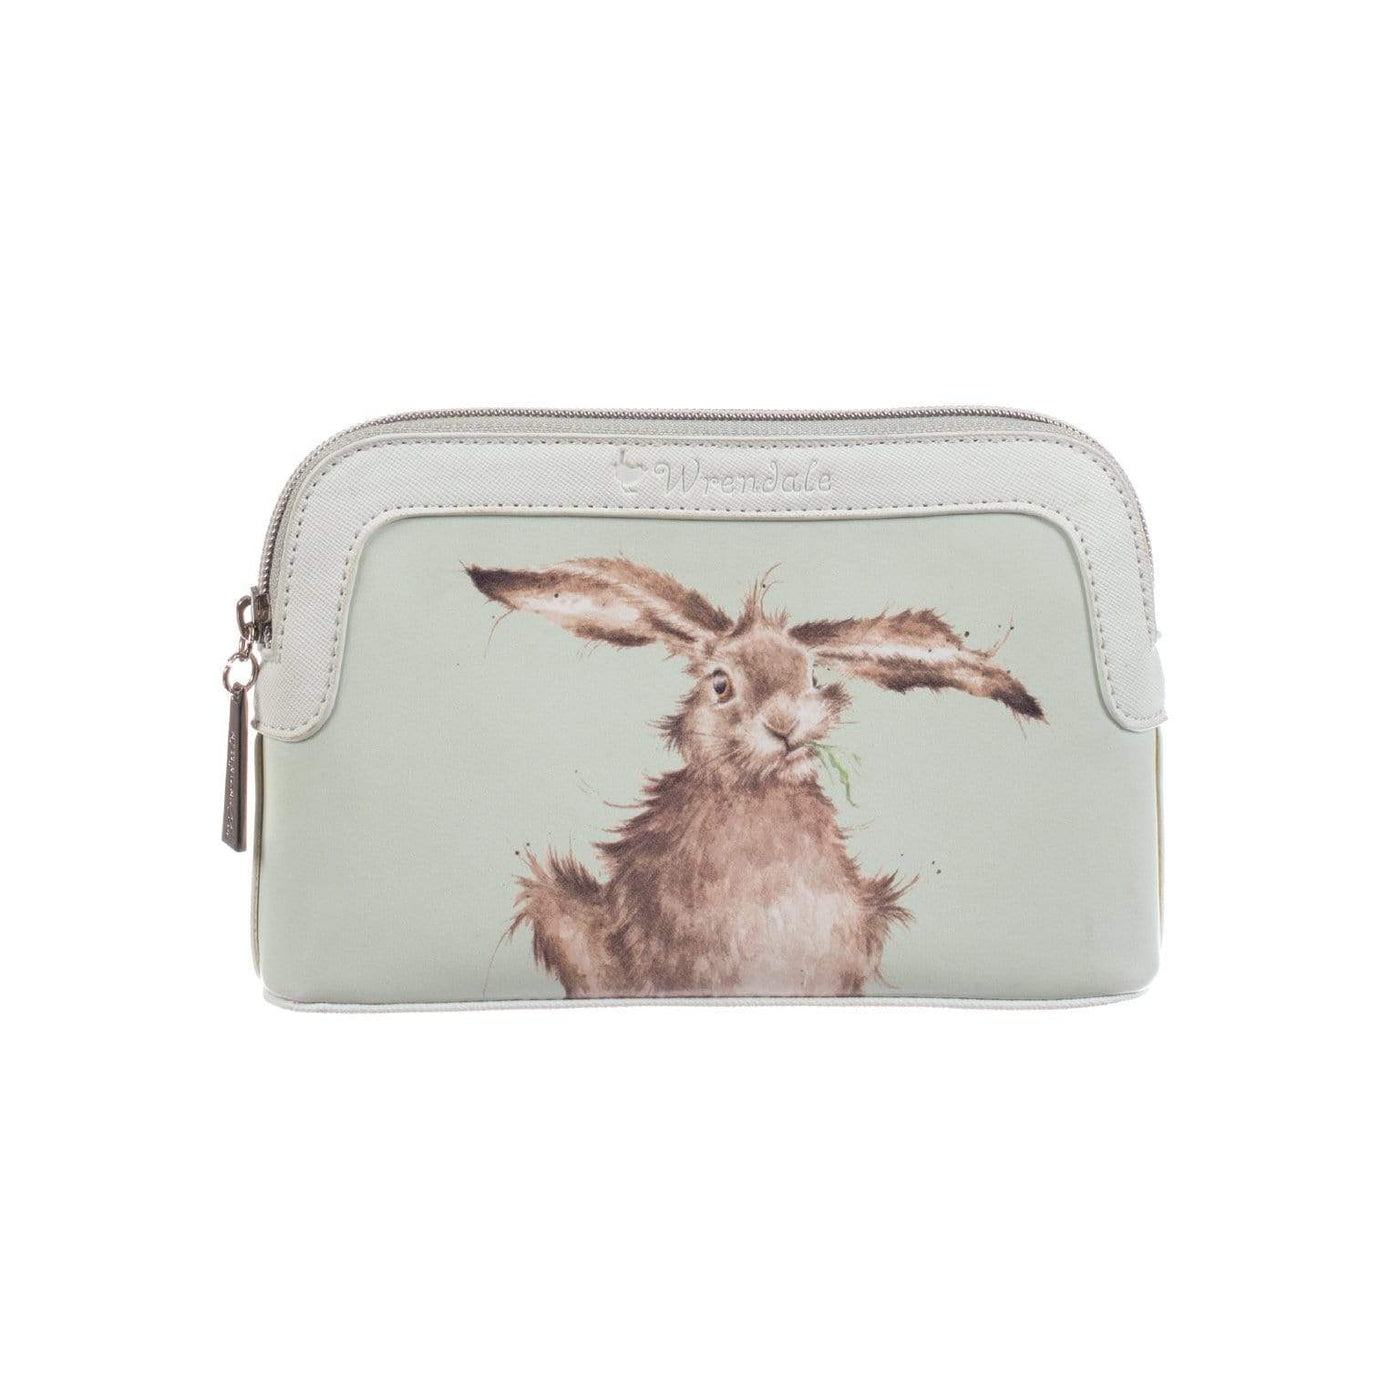 Wrendale Designs Wash & Make Up Bags Hare Design Small Cosmetic Bag